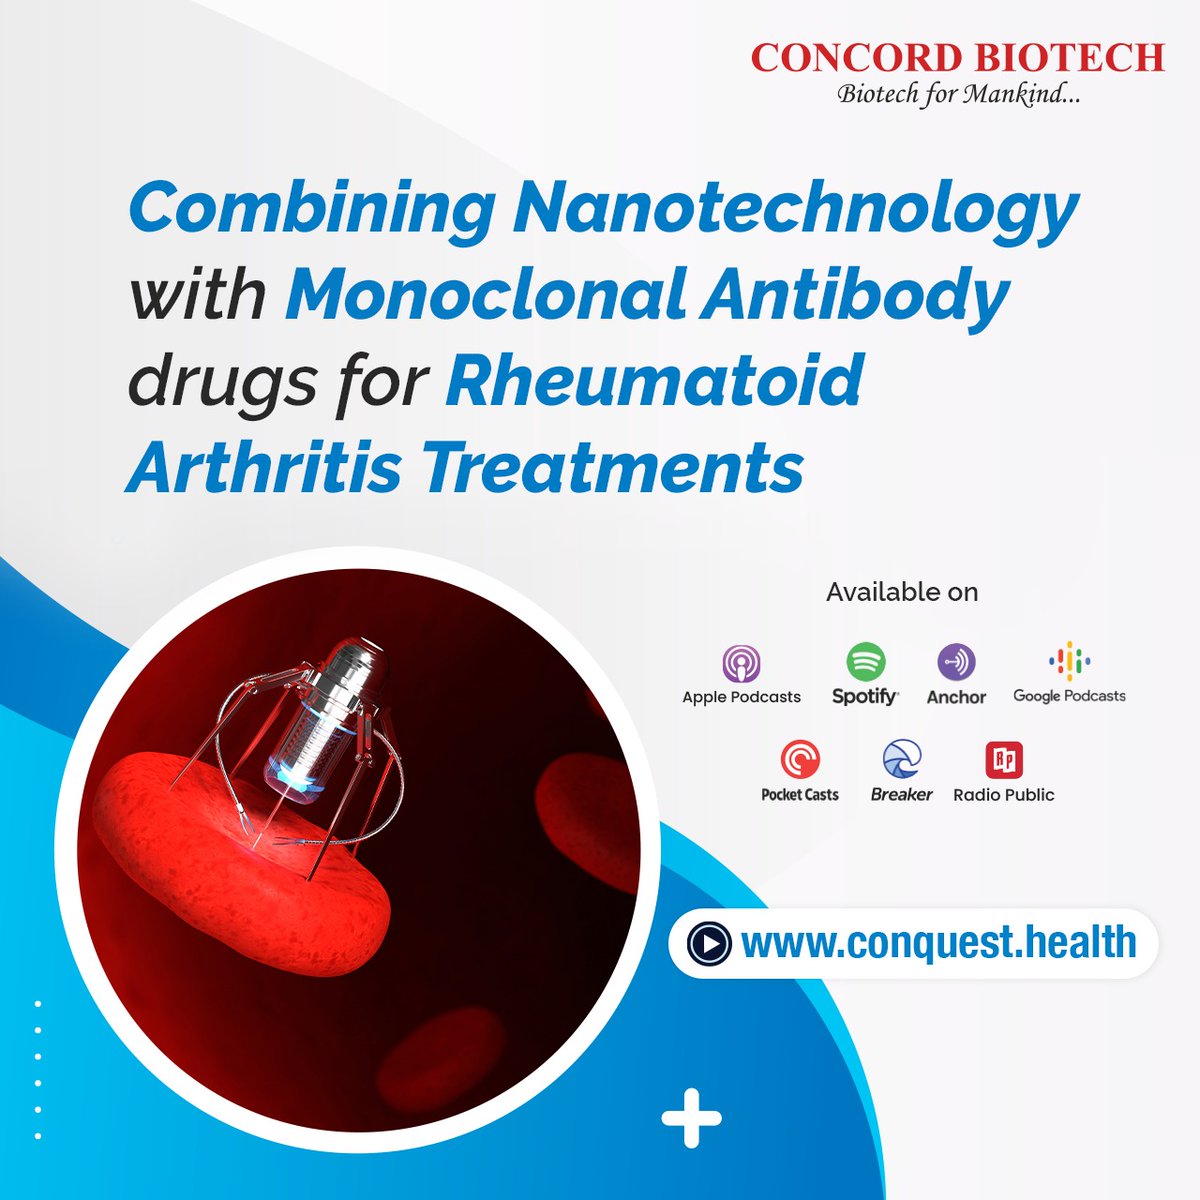 On today's episode of the #GoodHealthConquest, we'll talk about how #nanotechnology and #monoclonalantibody drugs can aid in the treatment of #rheumatoidarthritis.
Listen now: spotifyanchor-web.app.link/e/3EMZBBbKADb
For more information, visit our website at conquest.health.